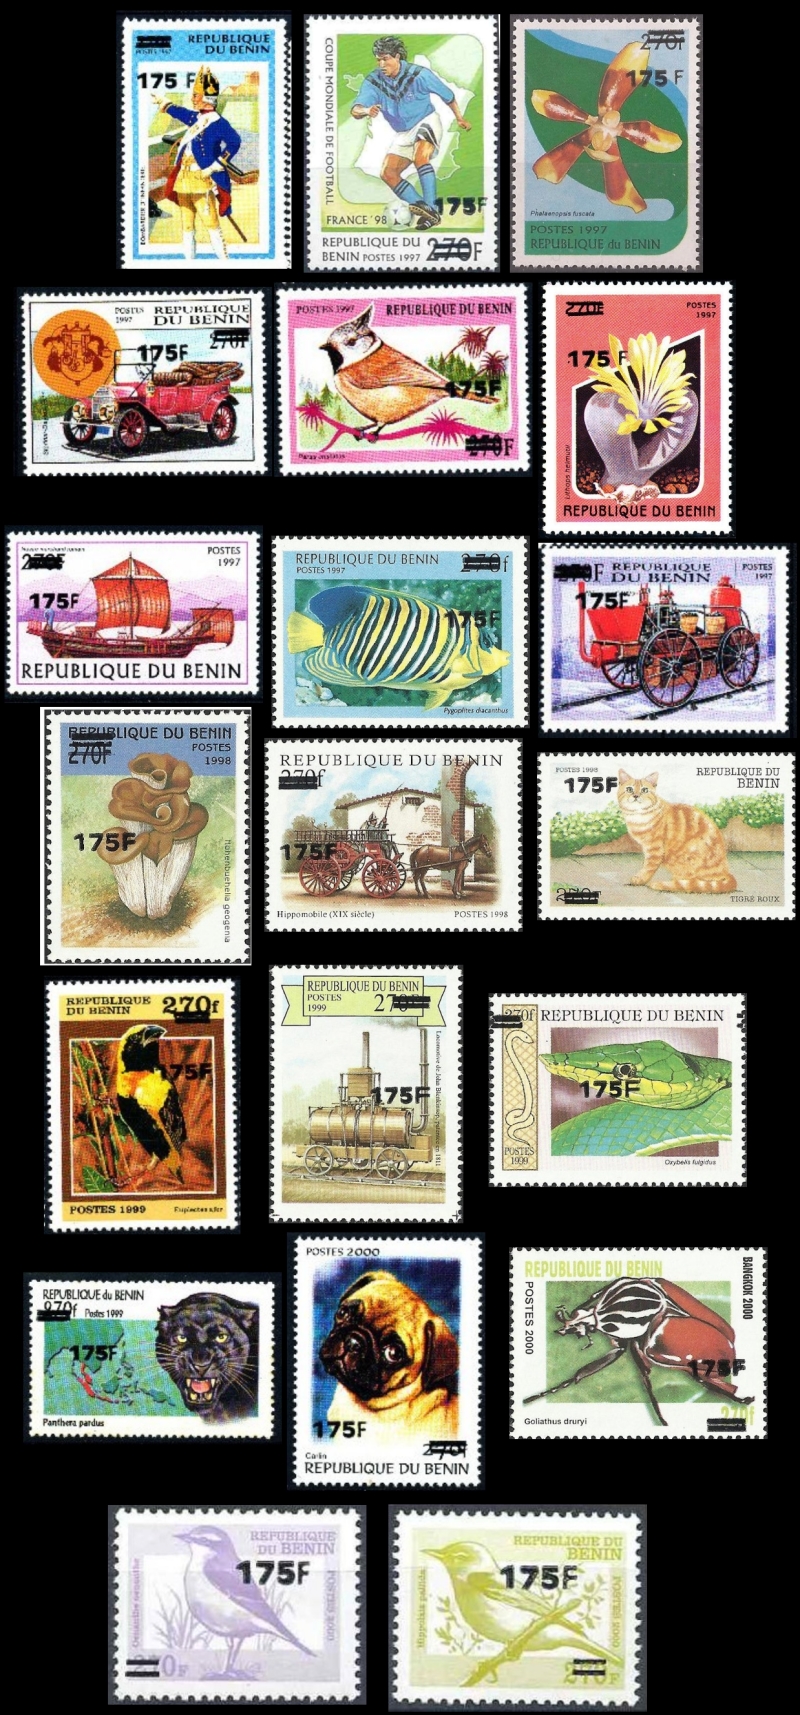 Benin 2005 Surcharged Stamps without Scott Numbers but listed in Michel